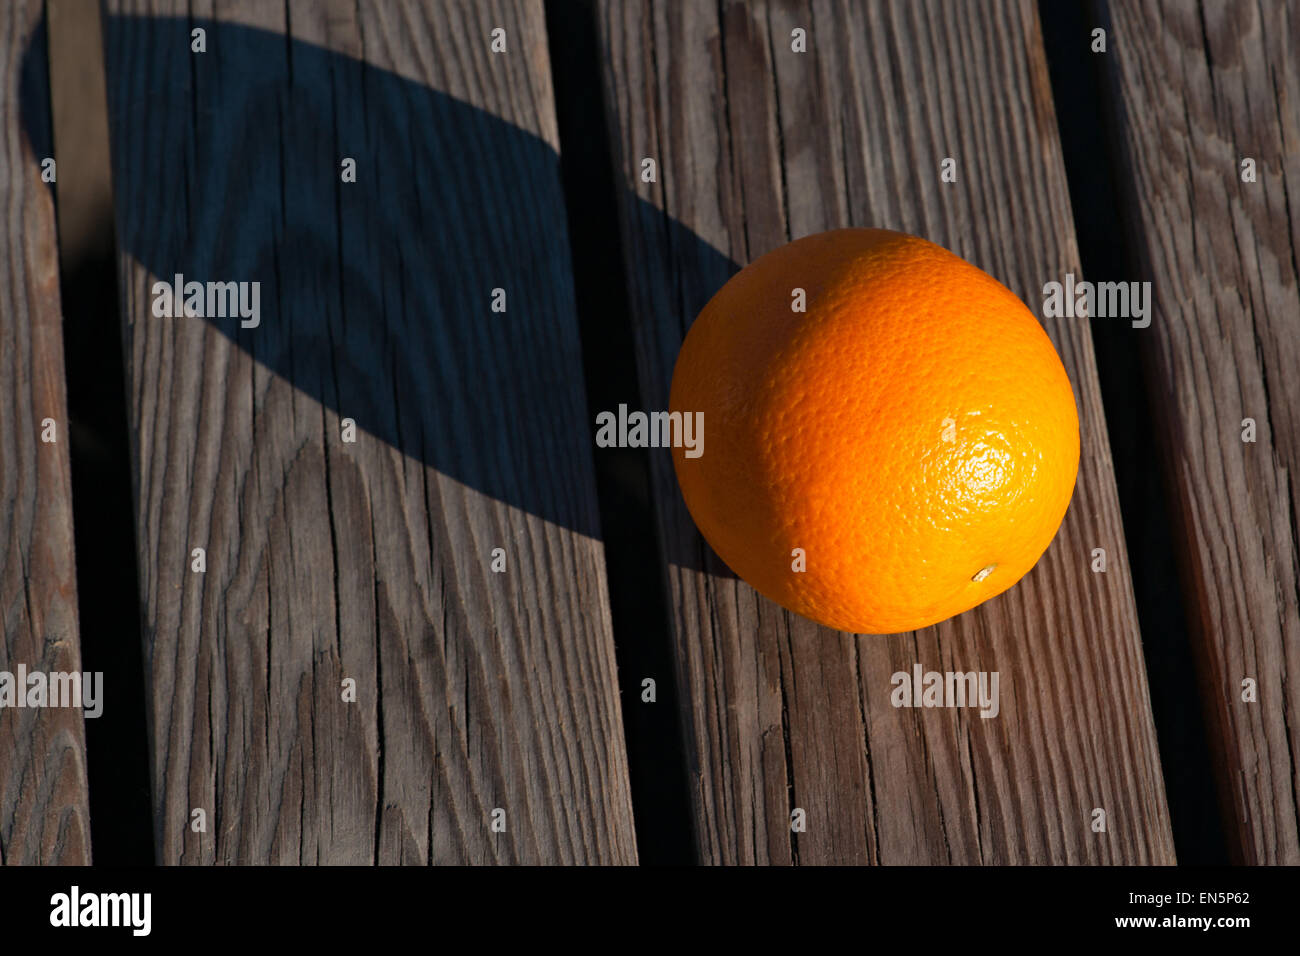 Orange fruit on a wooden bench in incline sunlight. The fruit casts the long shadow. Play of light and shadow Stock Photo